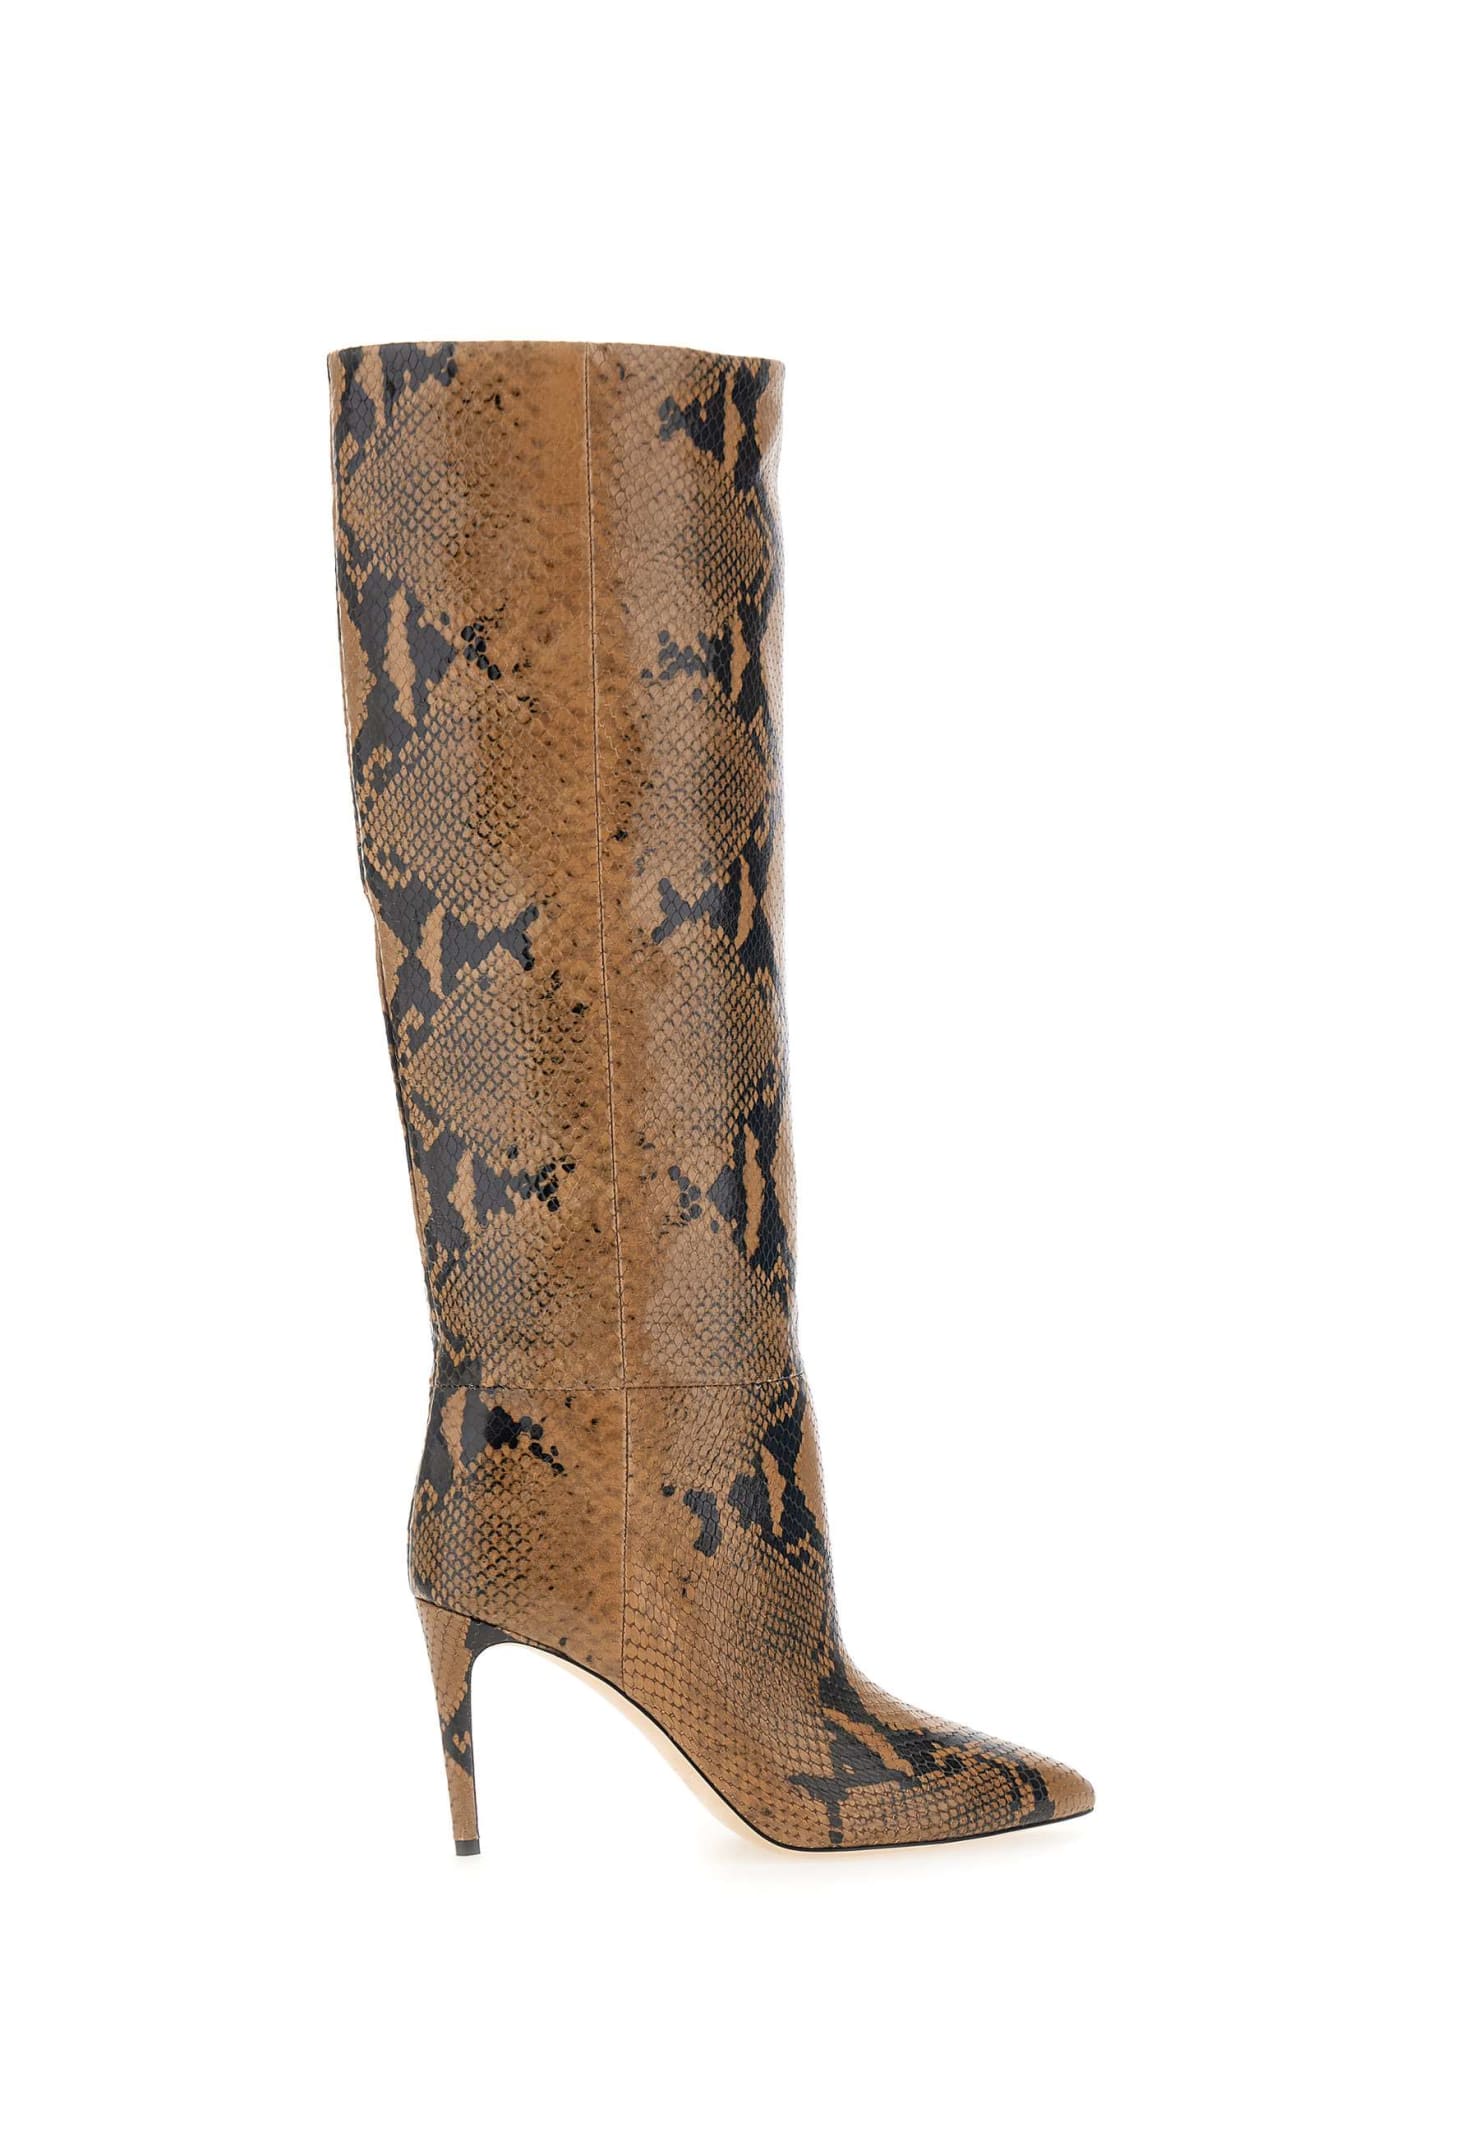 PARIS TEXAS BOOT 85 LEATHER BOOTS